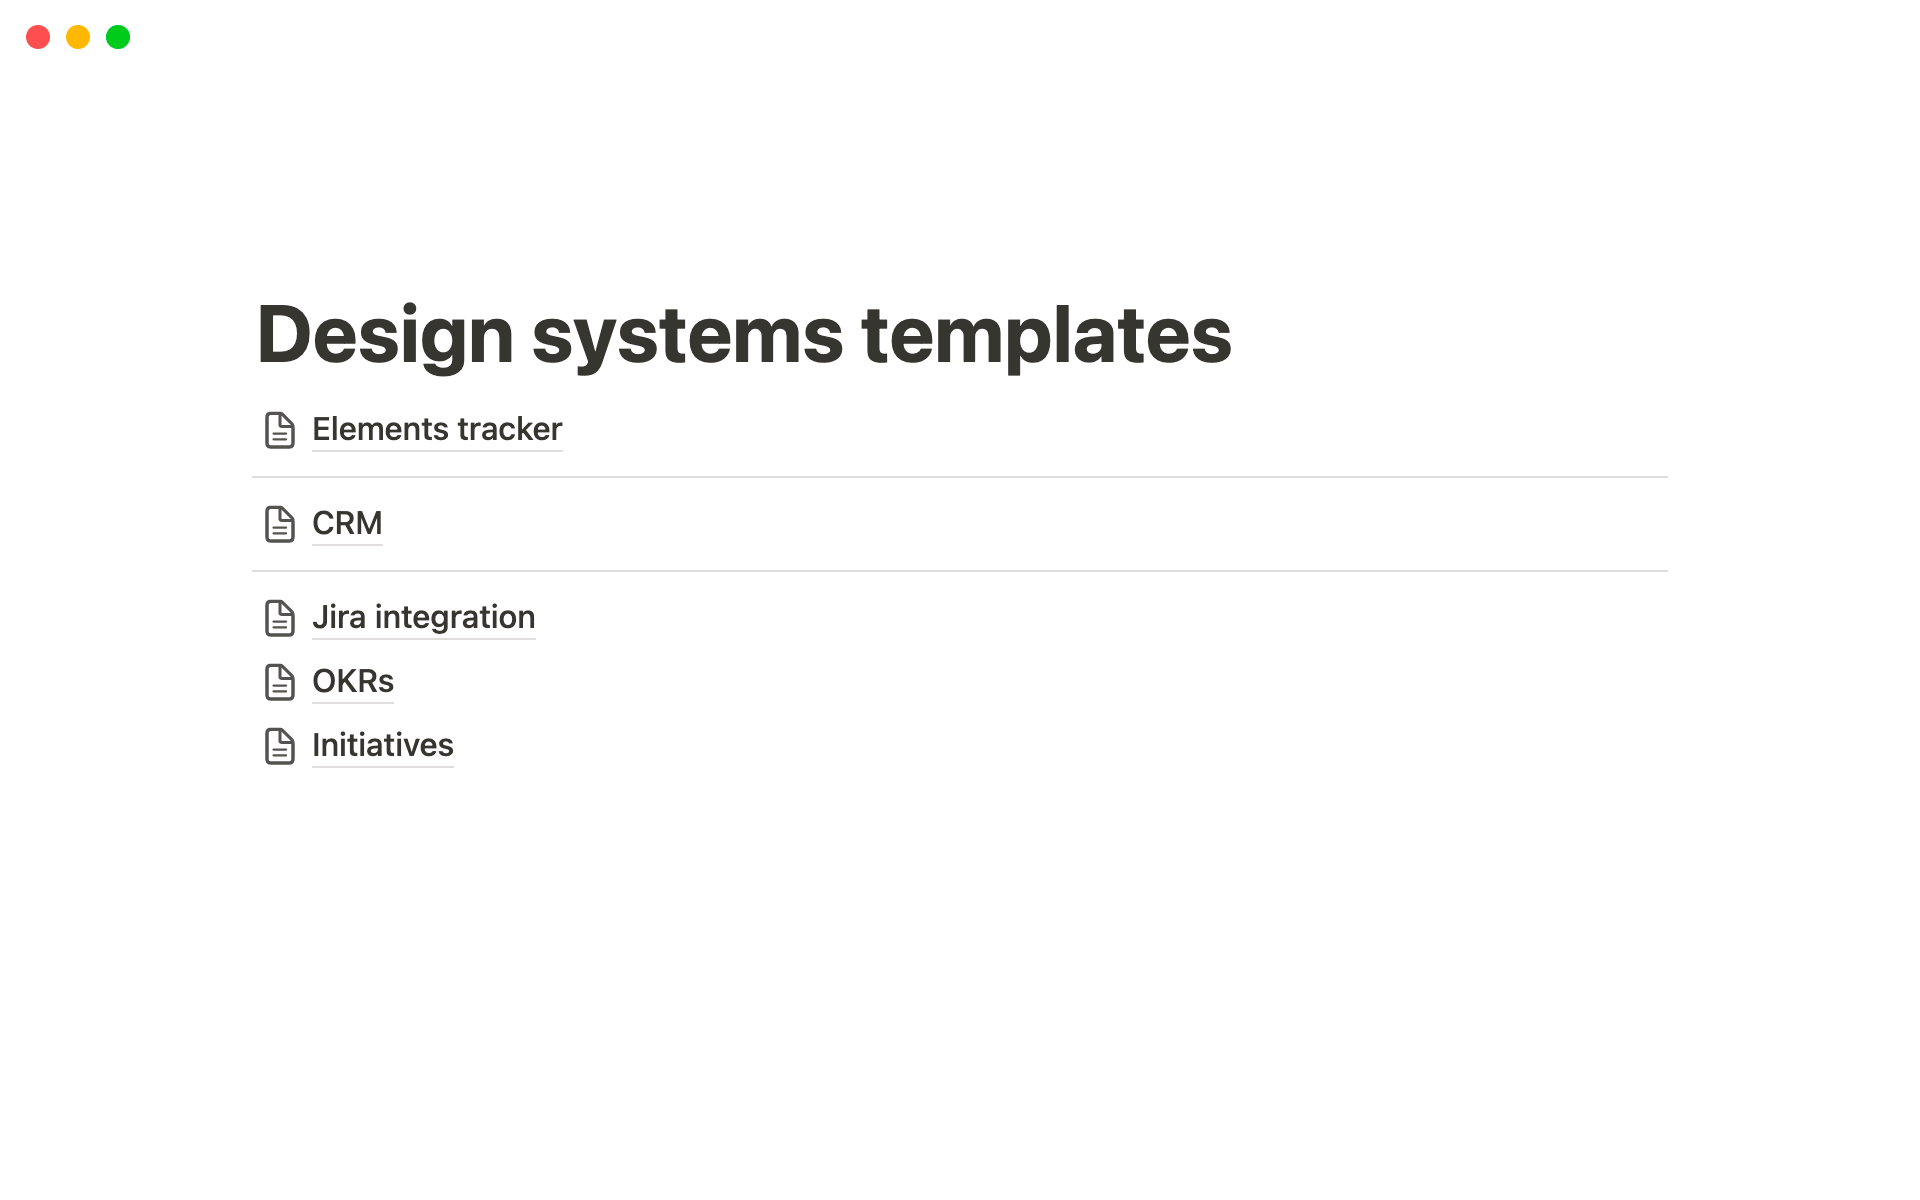 It tracks elements of a Design system (components, foundations, etc.)